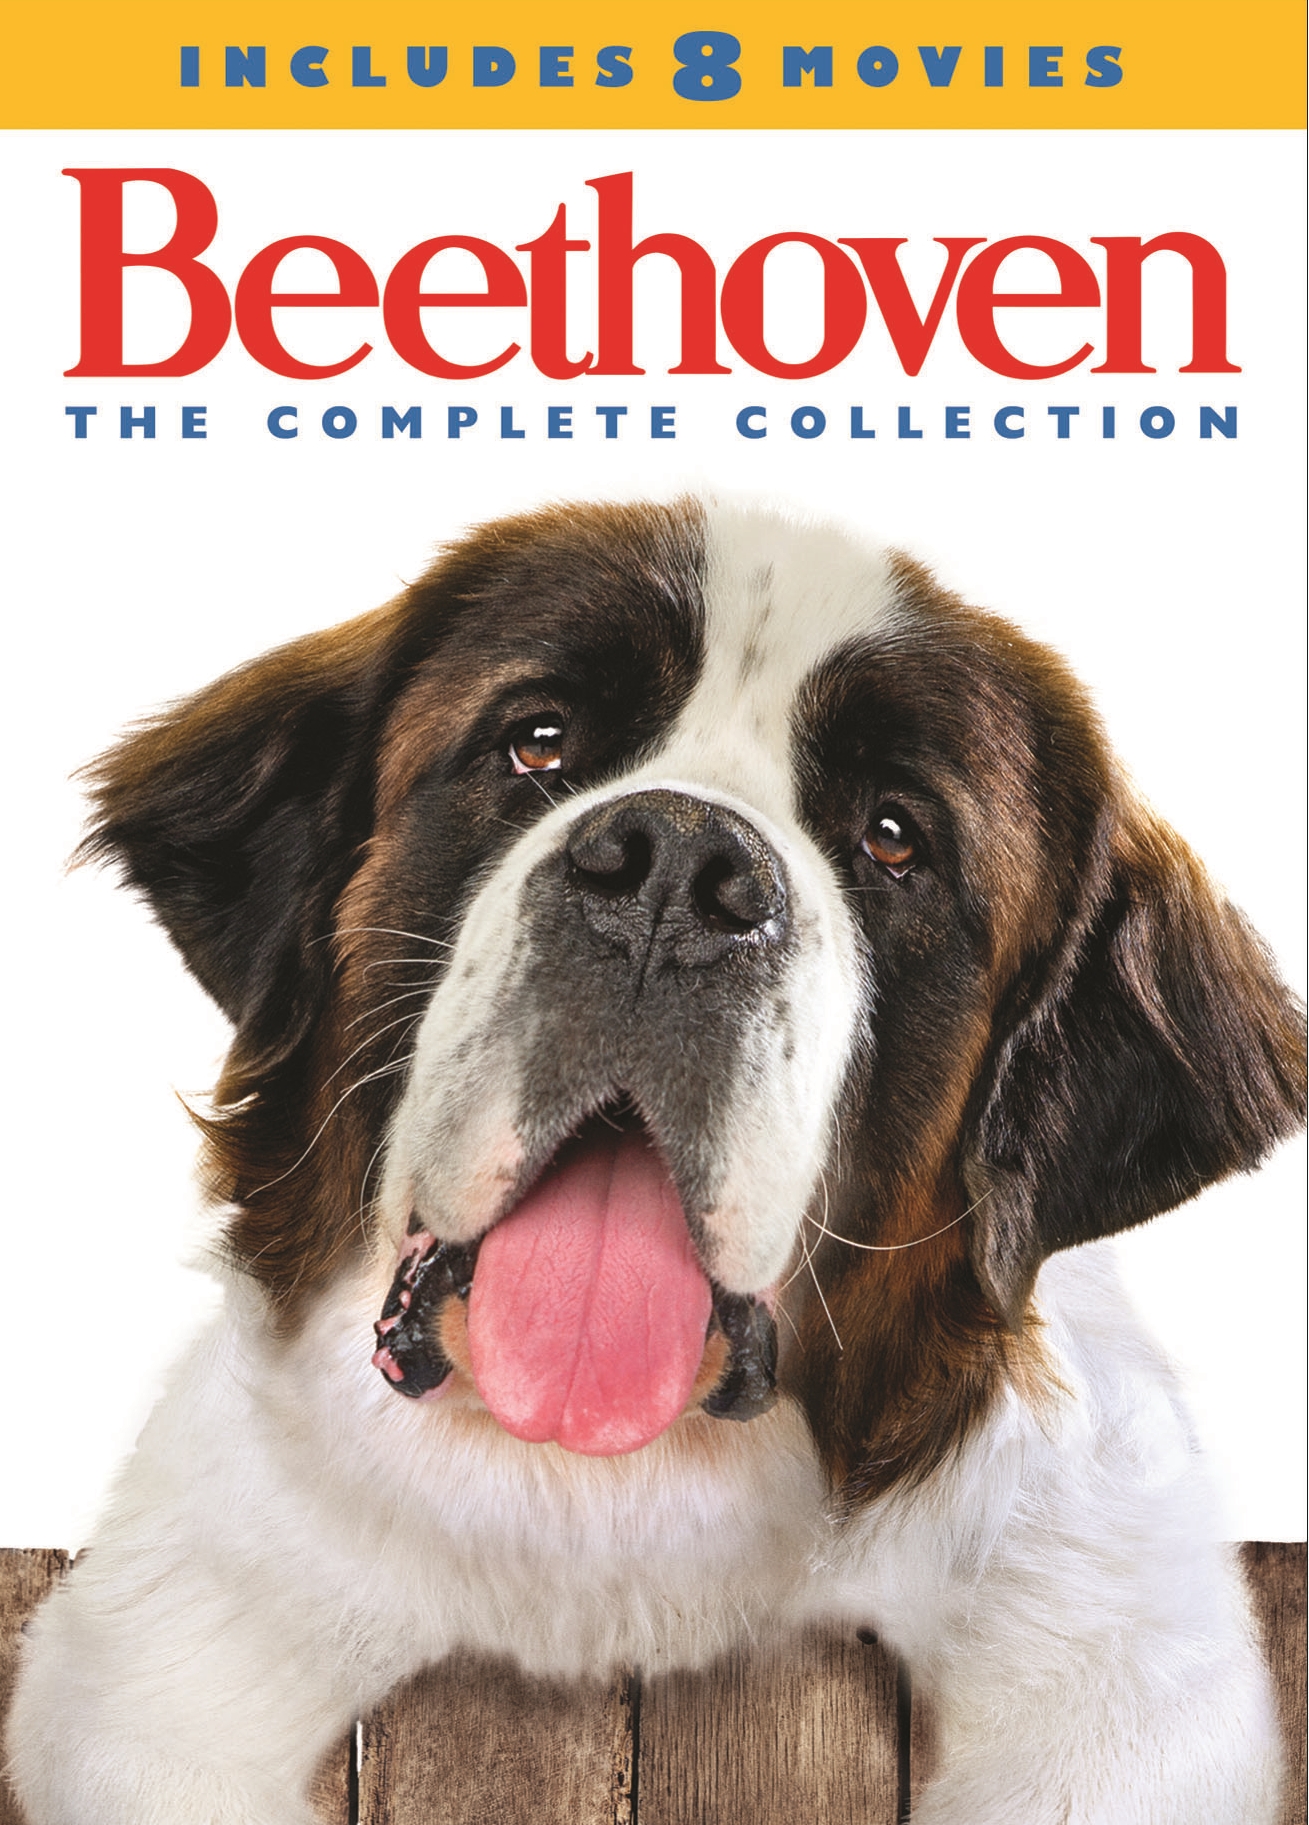 beethoven-the-complete-collection-includes-8-movies-4-discs-dvd